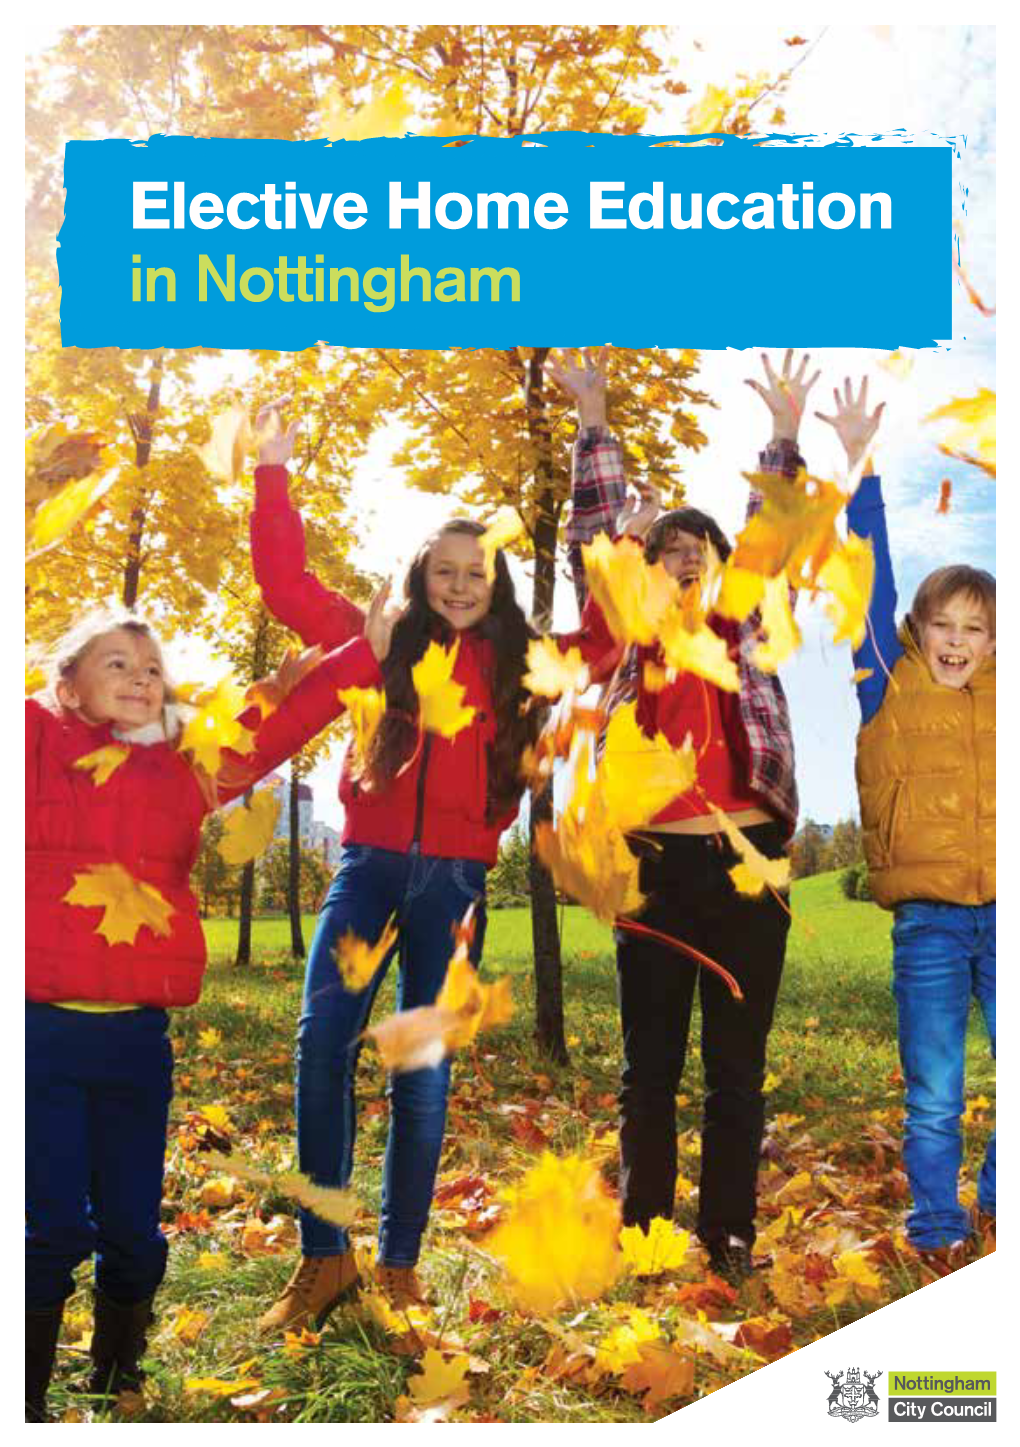 Elective Home Education in Nottingham